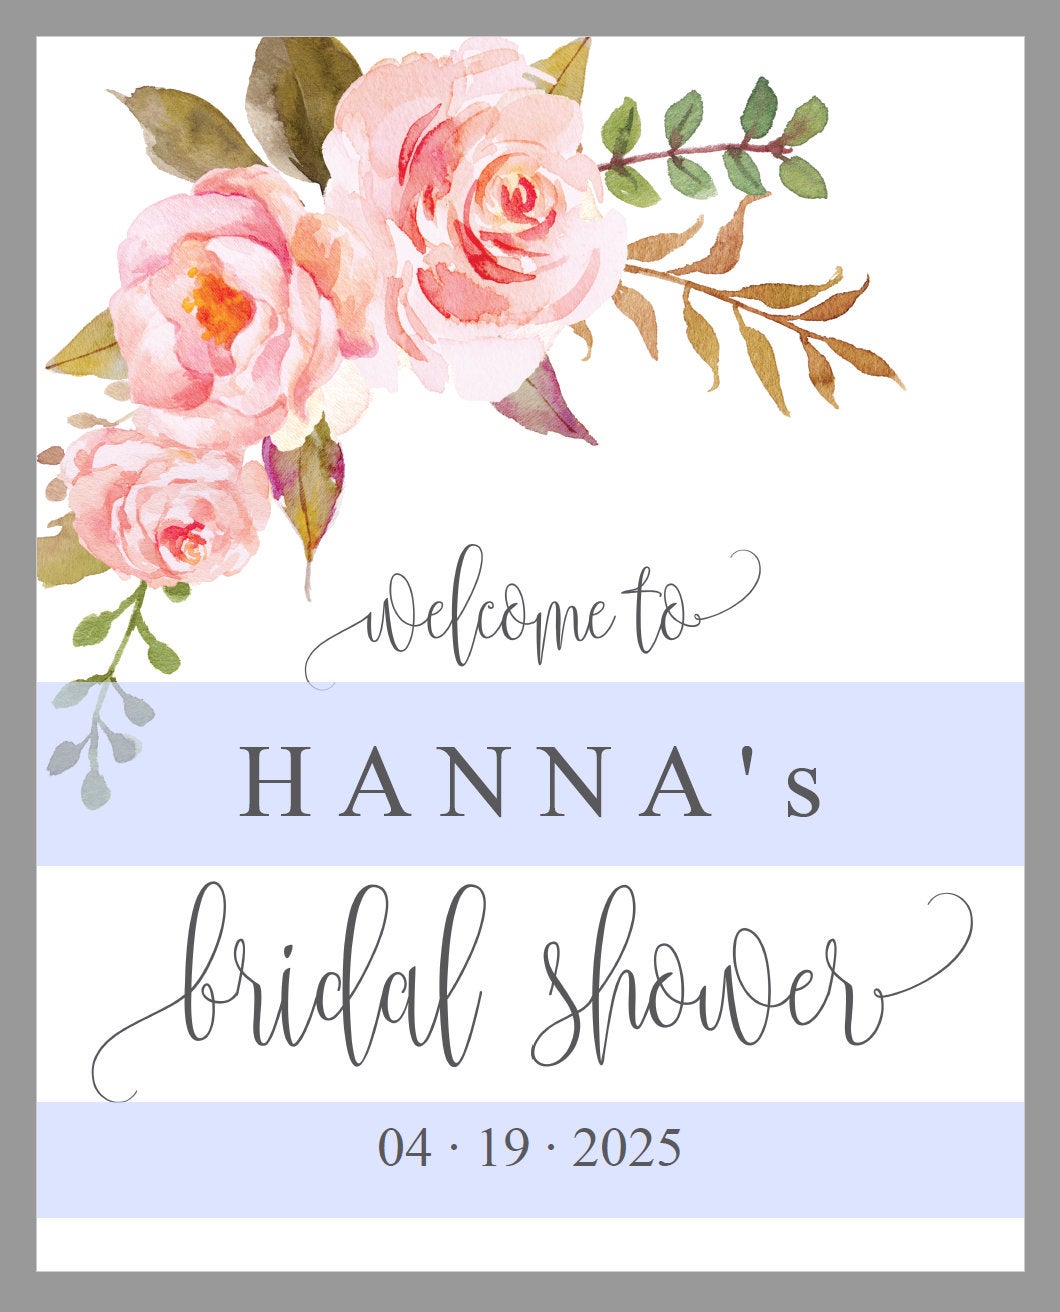 Floral Bridal Shower Welcome Sign Printable Template Editable Instant Download Wedding Décor  -HANNA SHOWER/BACH SIGNS SAVVY PAPER CO